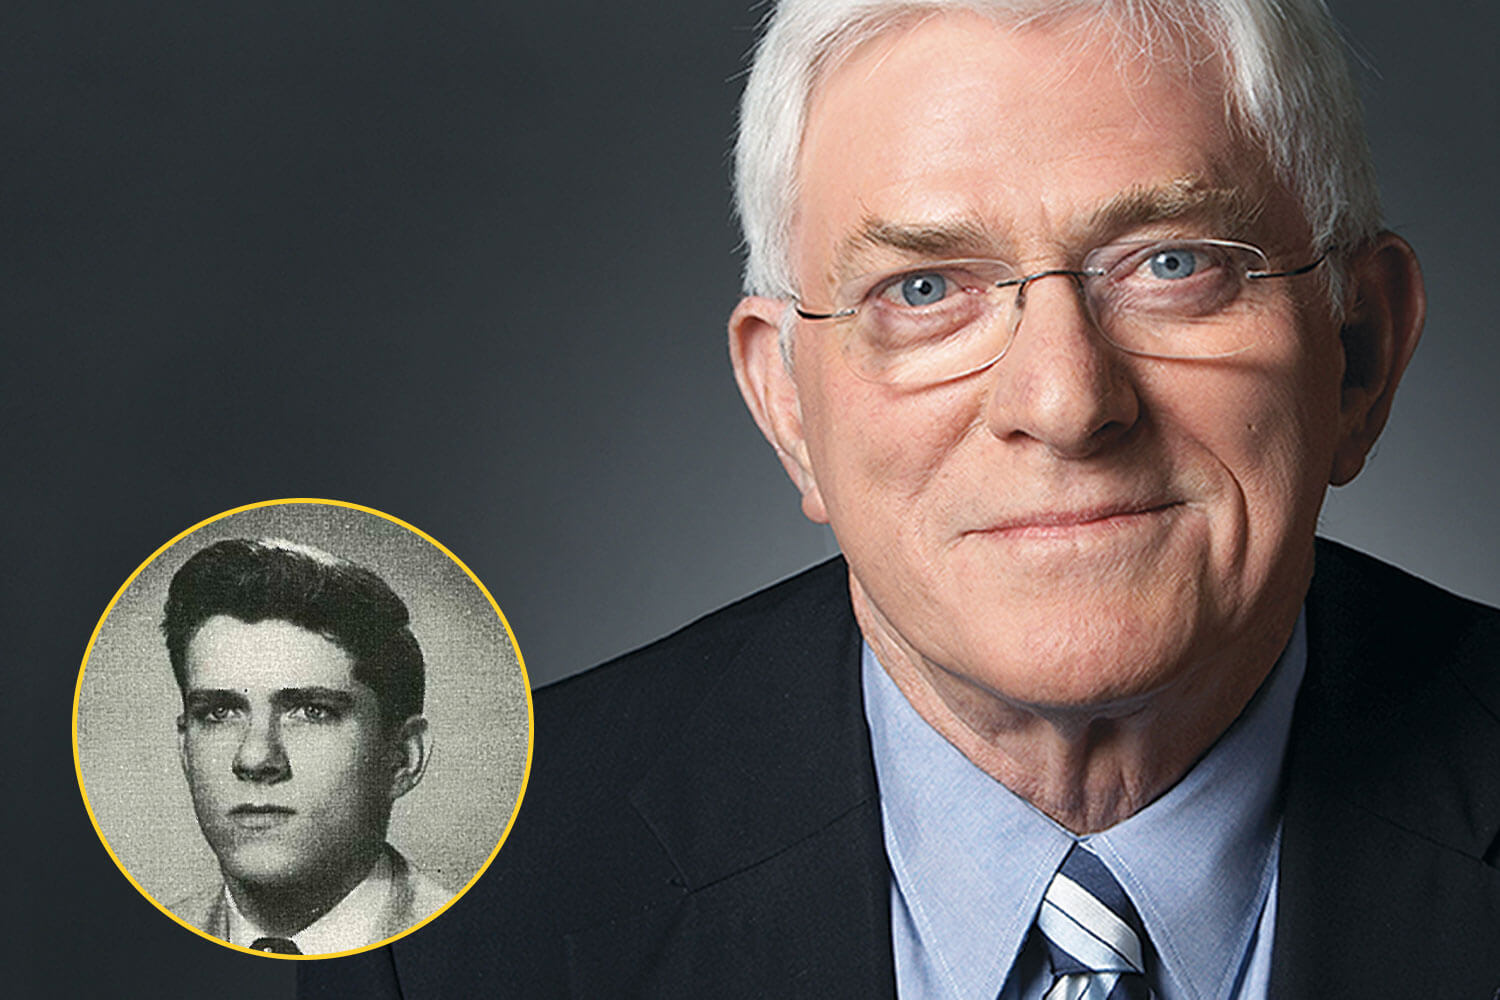 phil donahue with his yearbook photo from 1953